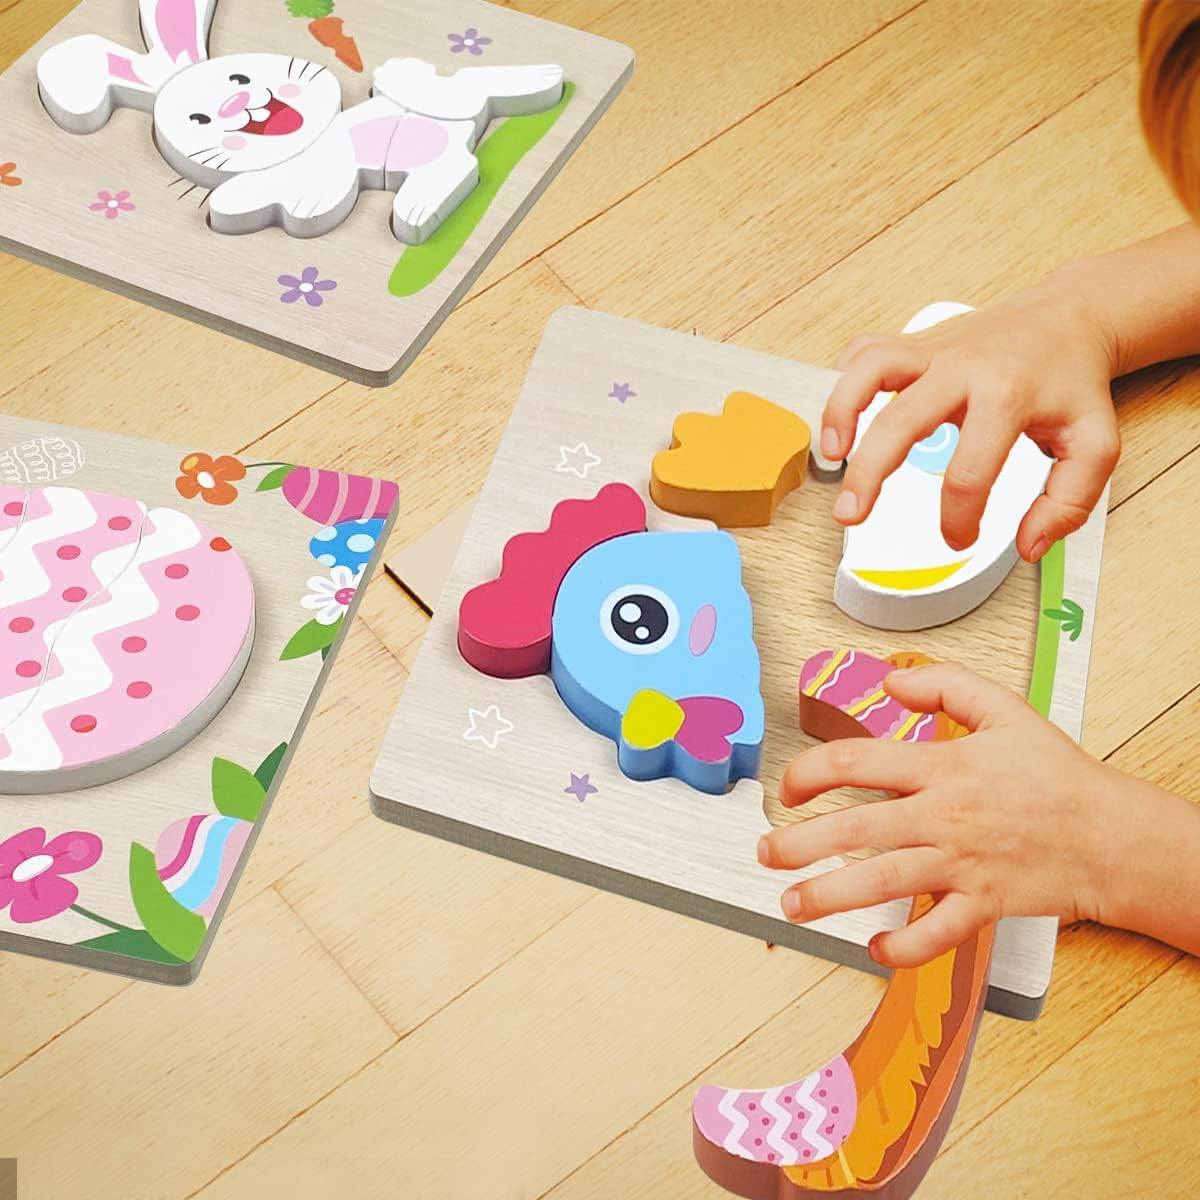 A child's hands assemble Montessori Easter Wooden Puzzles (4 Pack) with designs of a bunny, a bird, and decorated eggs on a wooden floor using InvenToy baby toys.